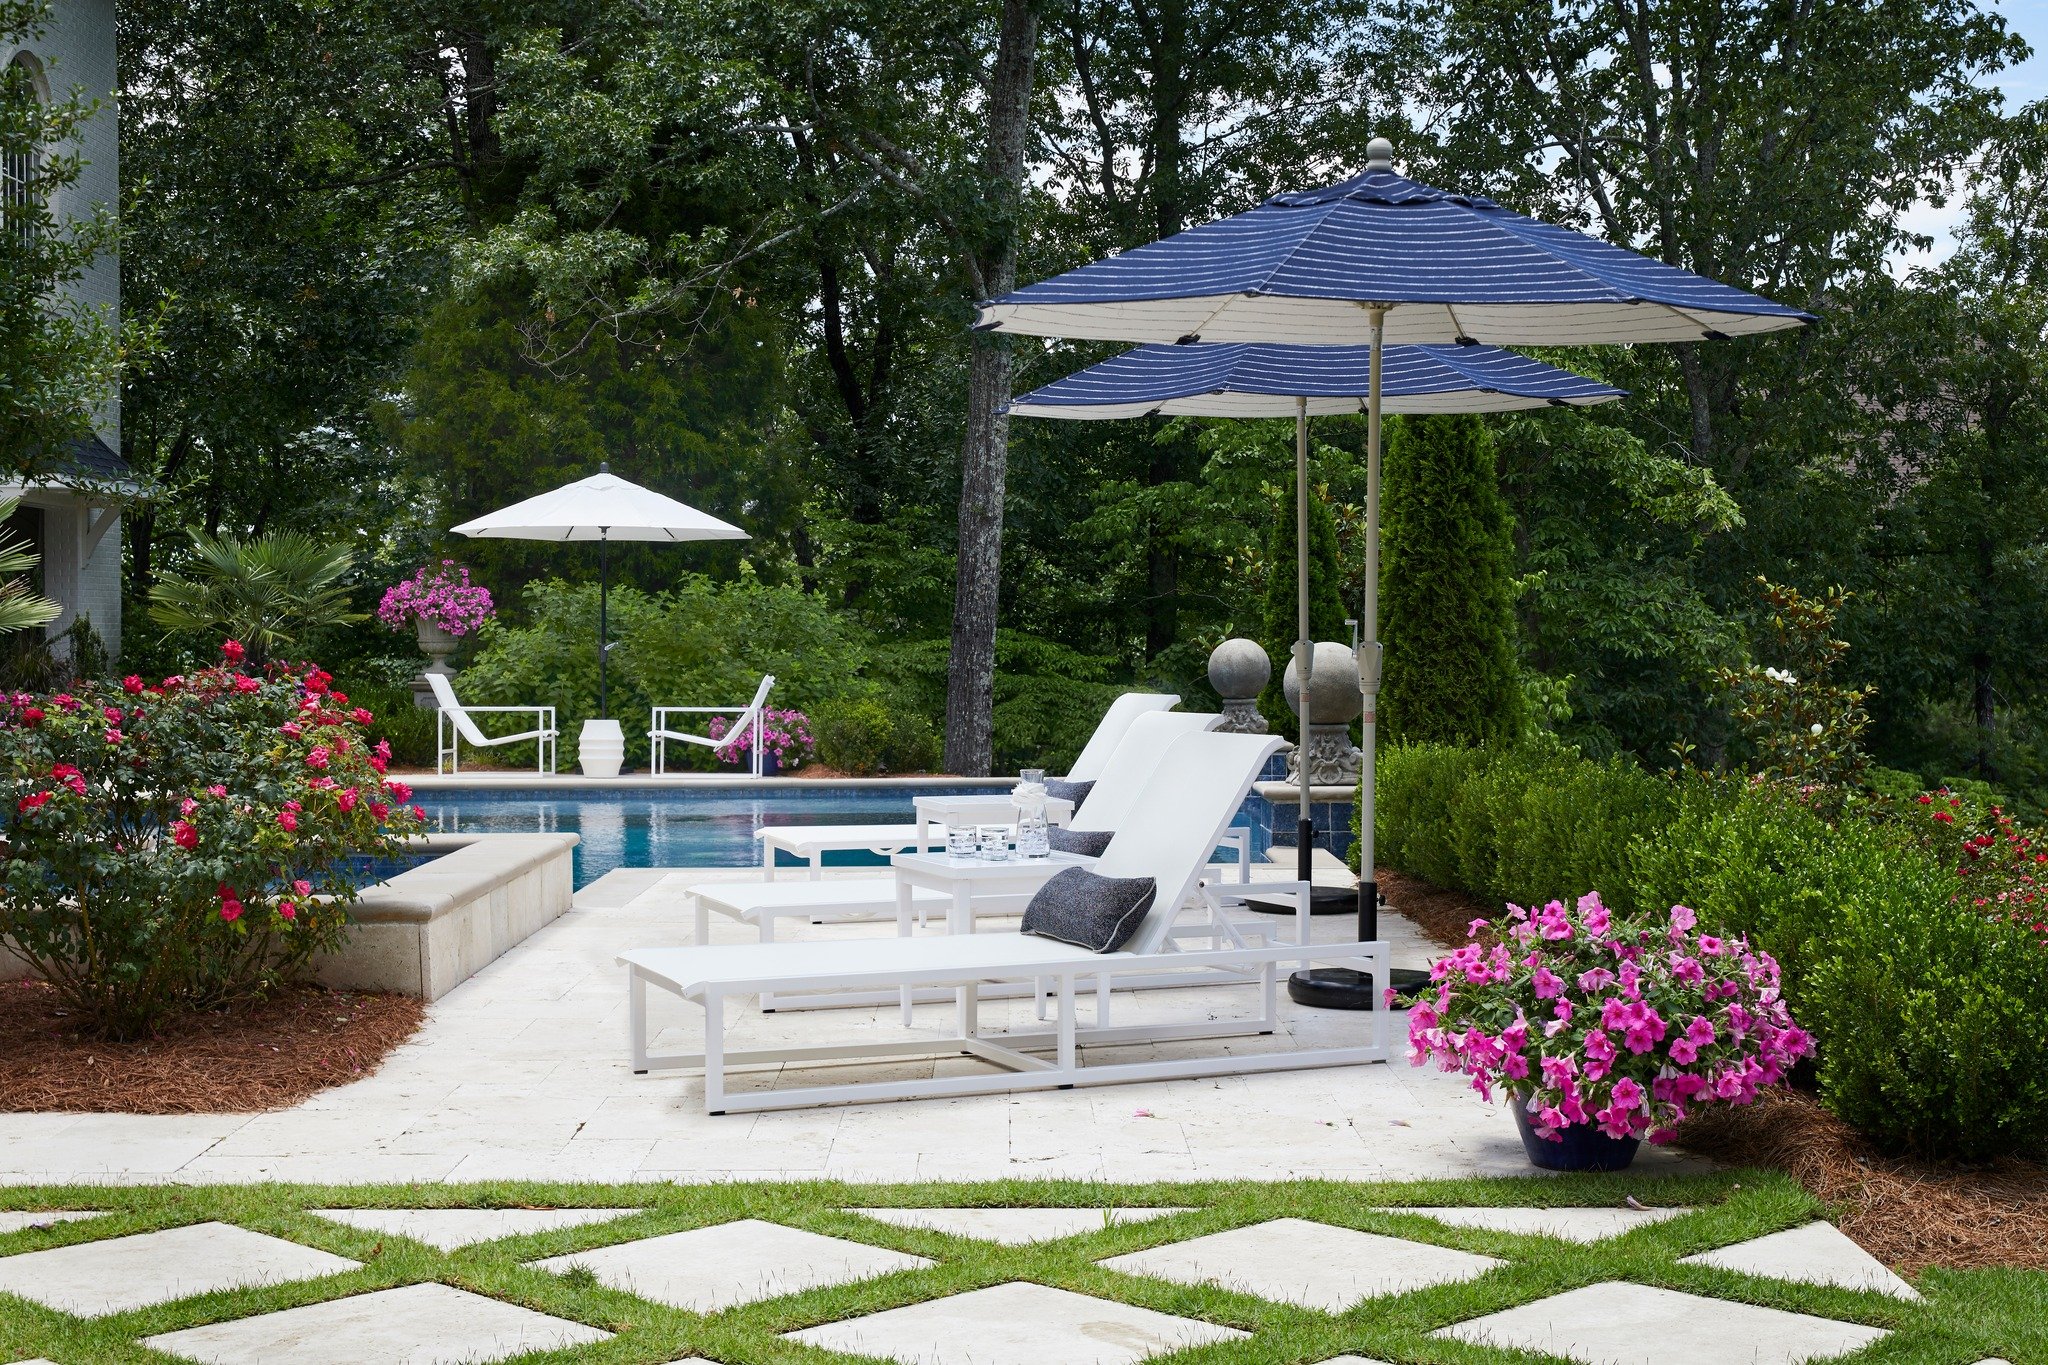 Spring is in full bloom and the Serenata Chalk Lounge Chairs are inviting you to live comfortably by the pool! 😍☀️@Summerclassics #outdoorliving #liveoutside #chenal #diningoutside #outdoorspace #littlerock #backyard #shoplocal